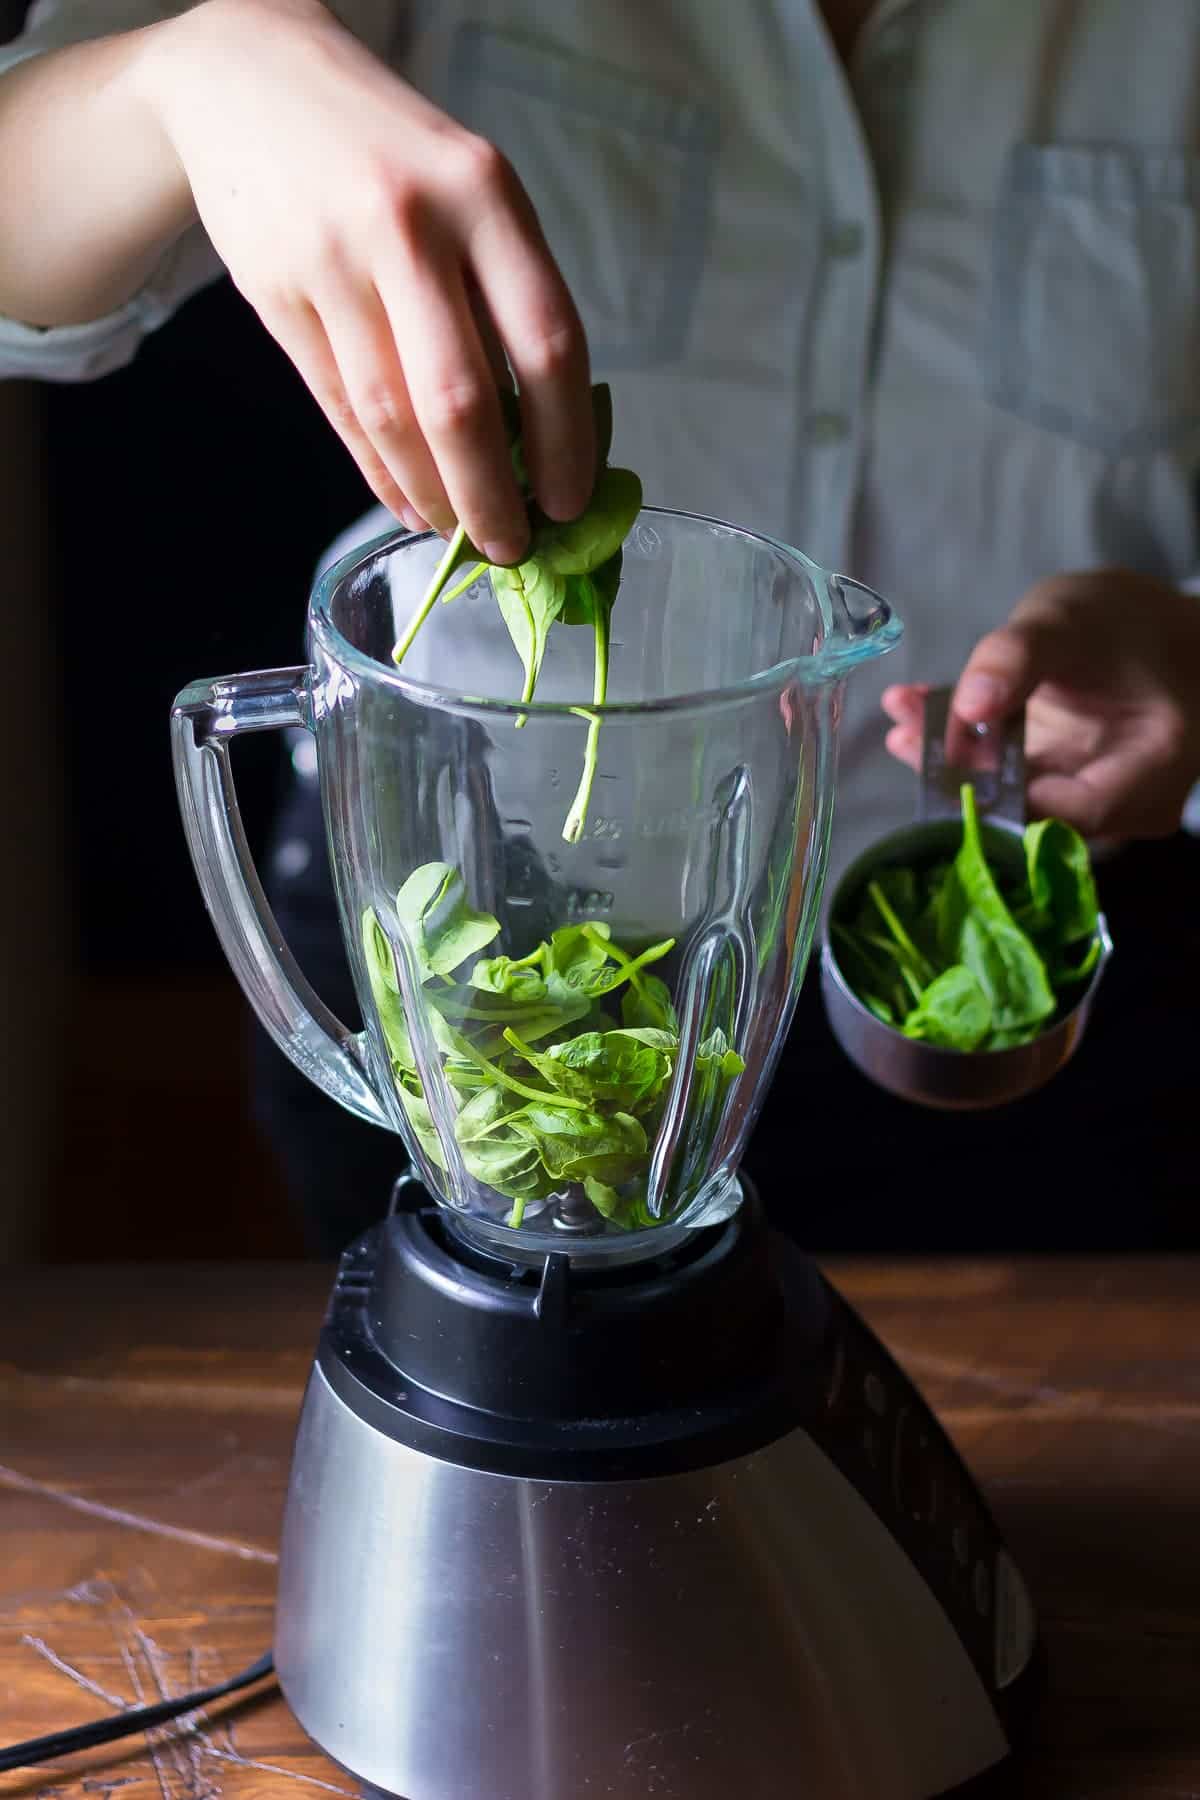 placing spinach into a blender